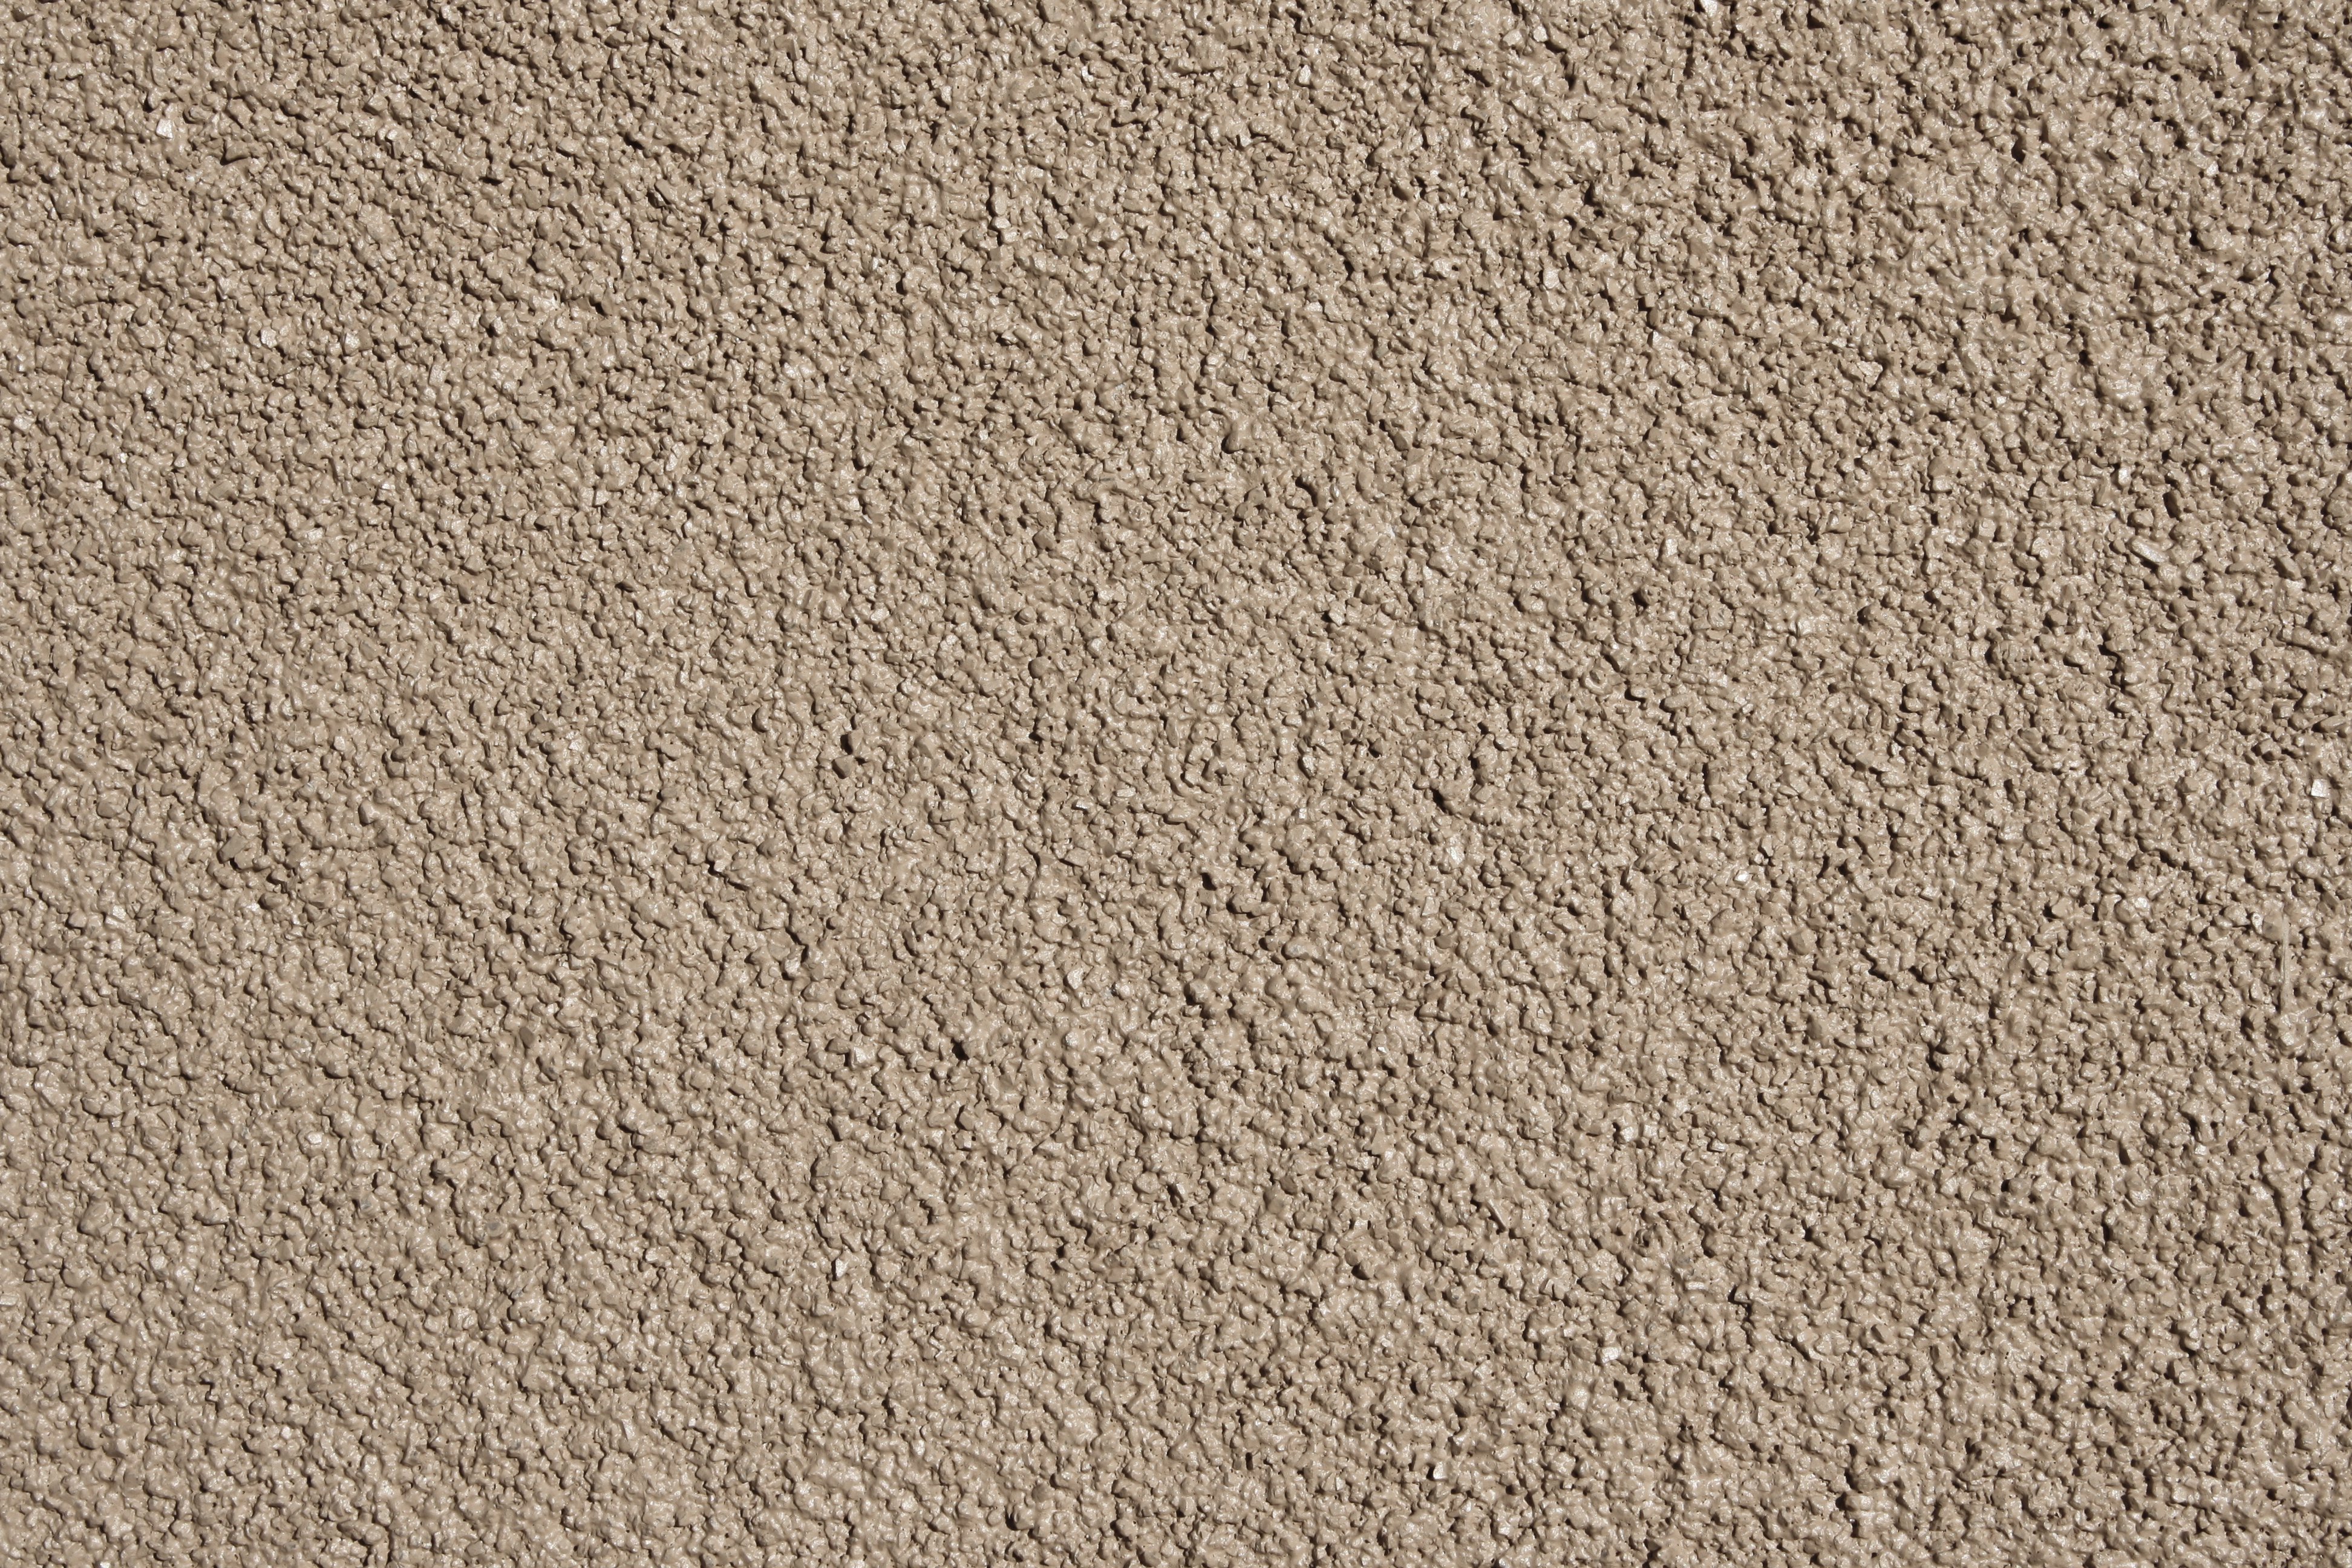 Beige Stucco Close Up Texture Picture Free Photograph Photos